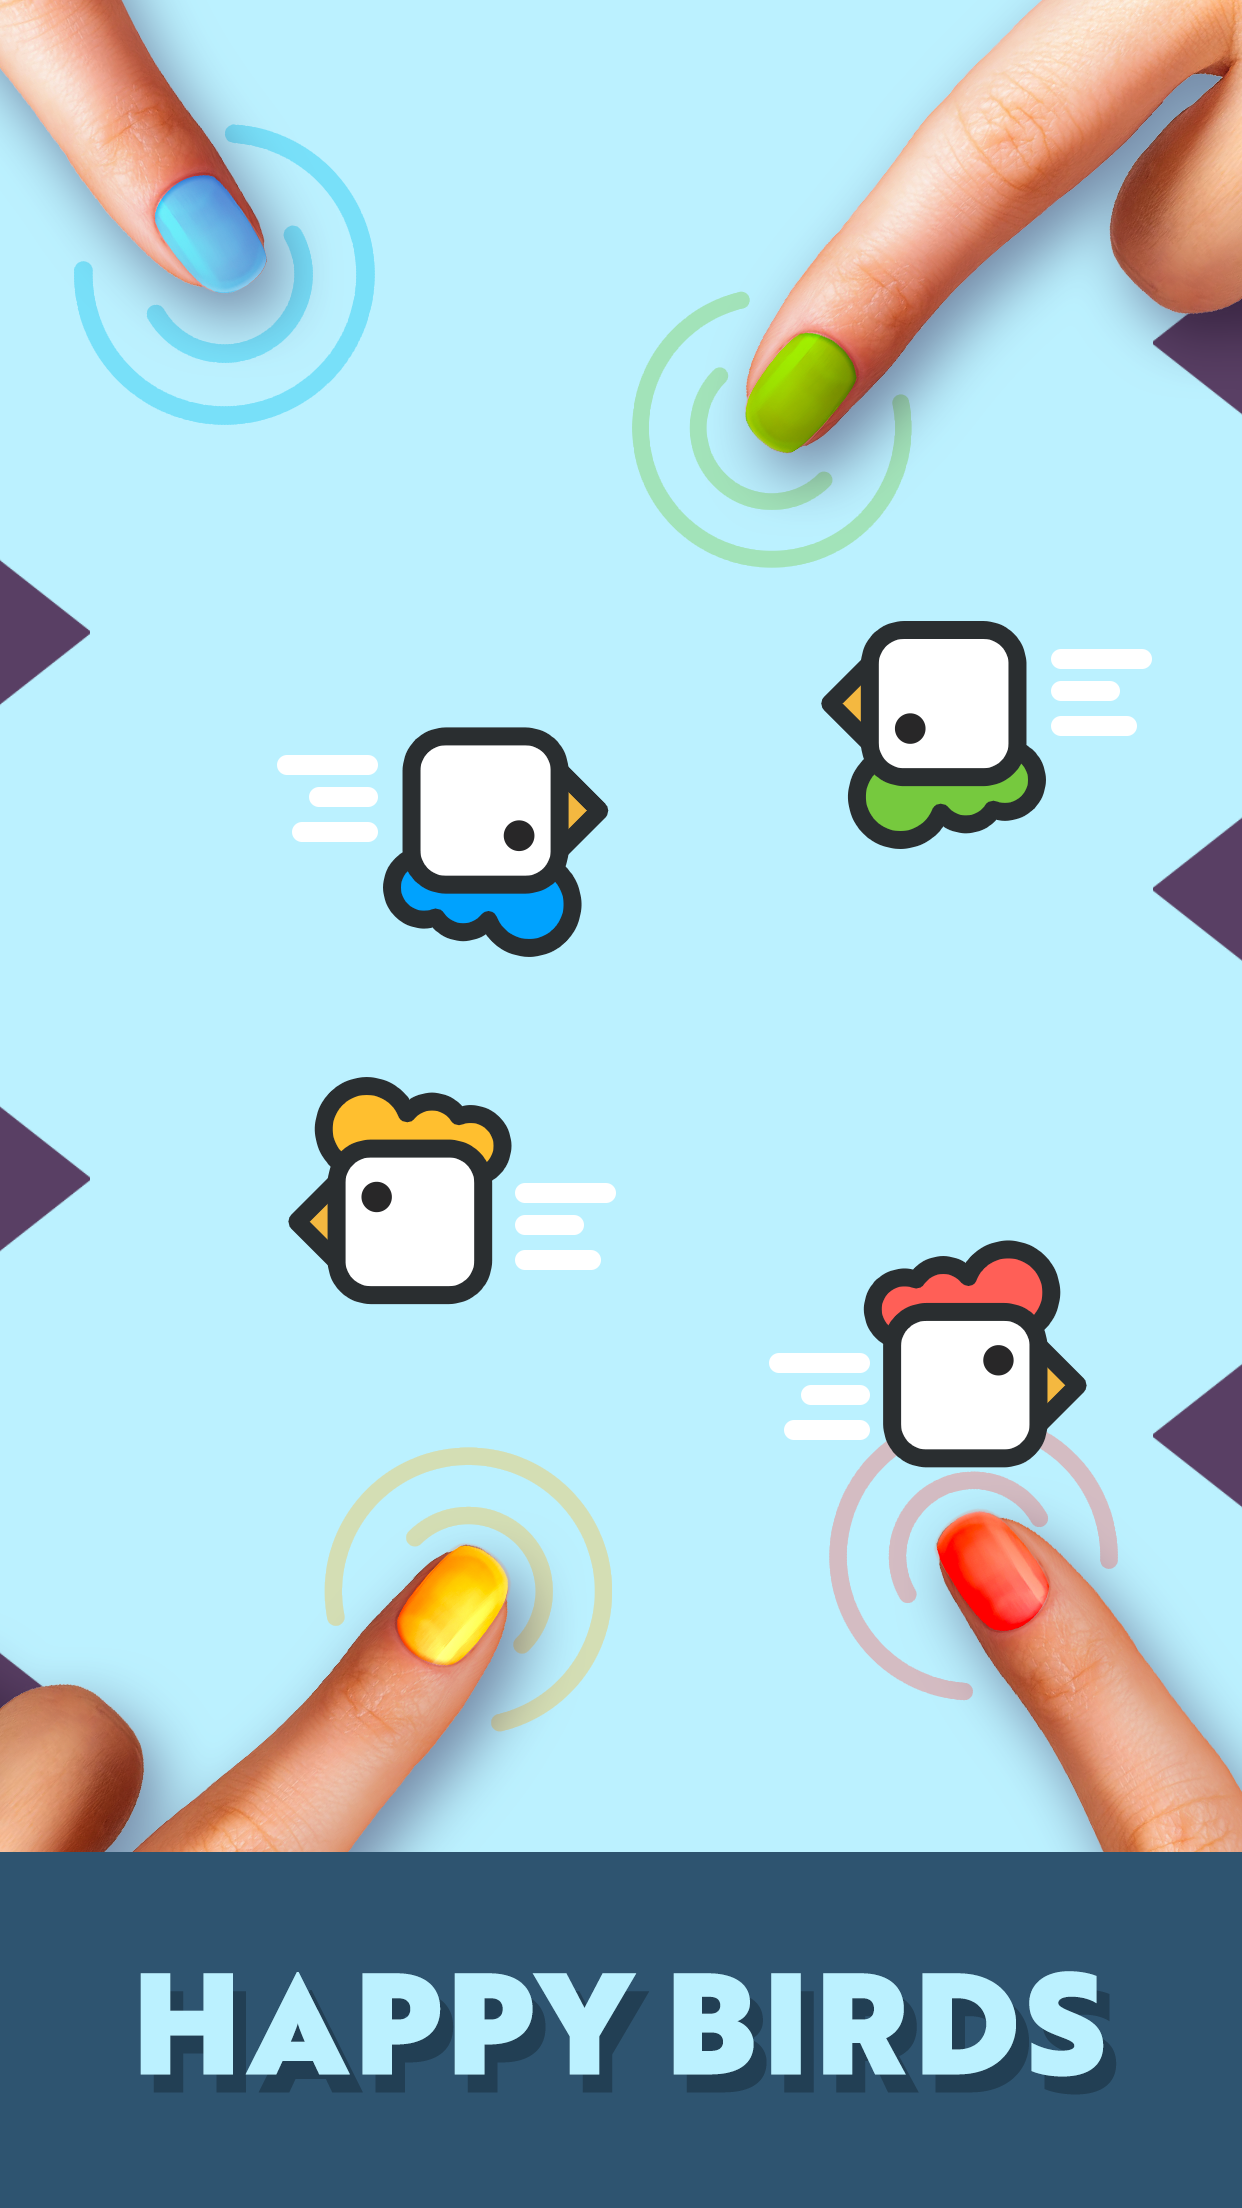 Super party - 234 Player Games Game for Android - Download